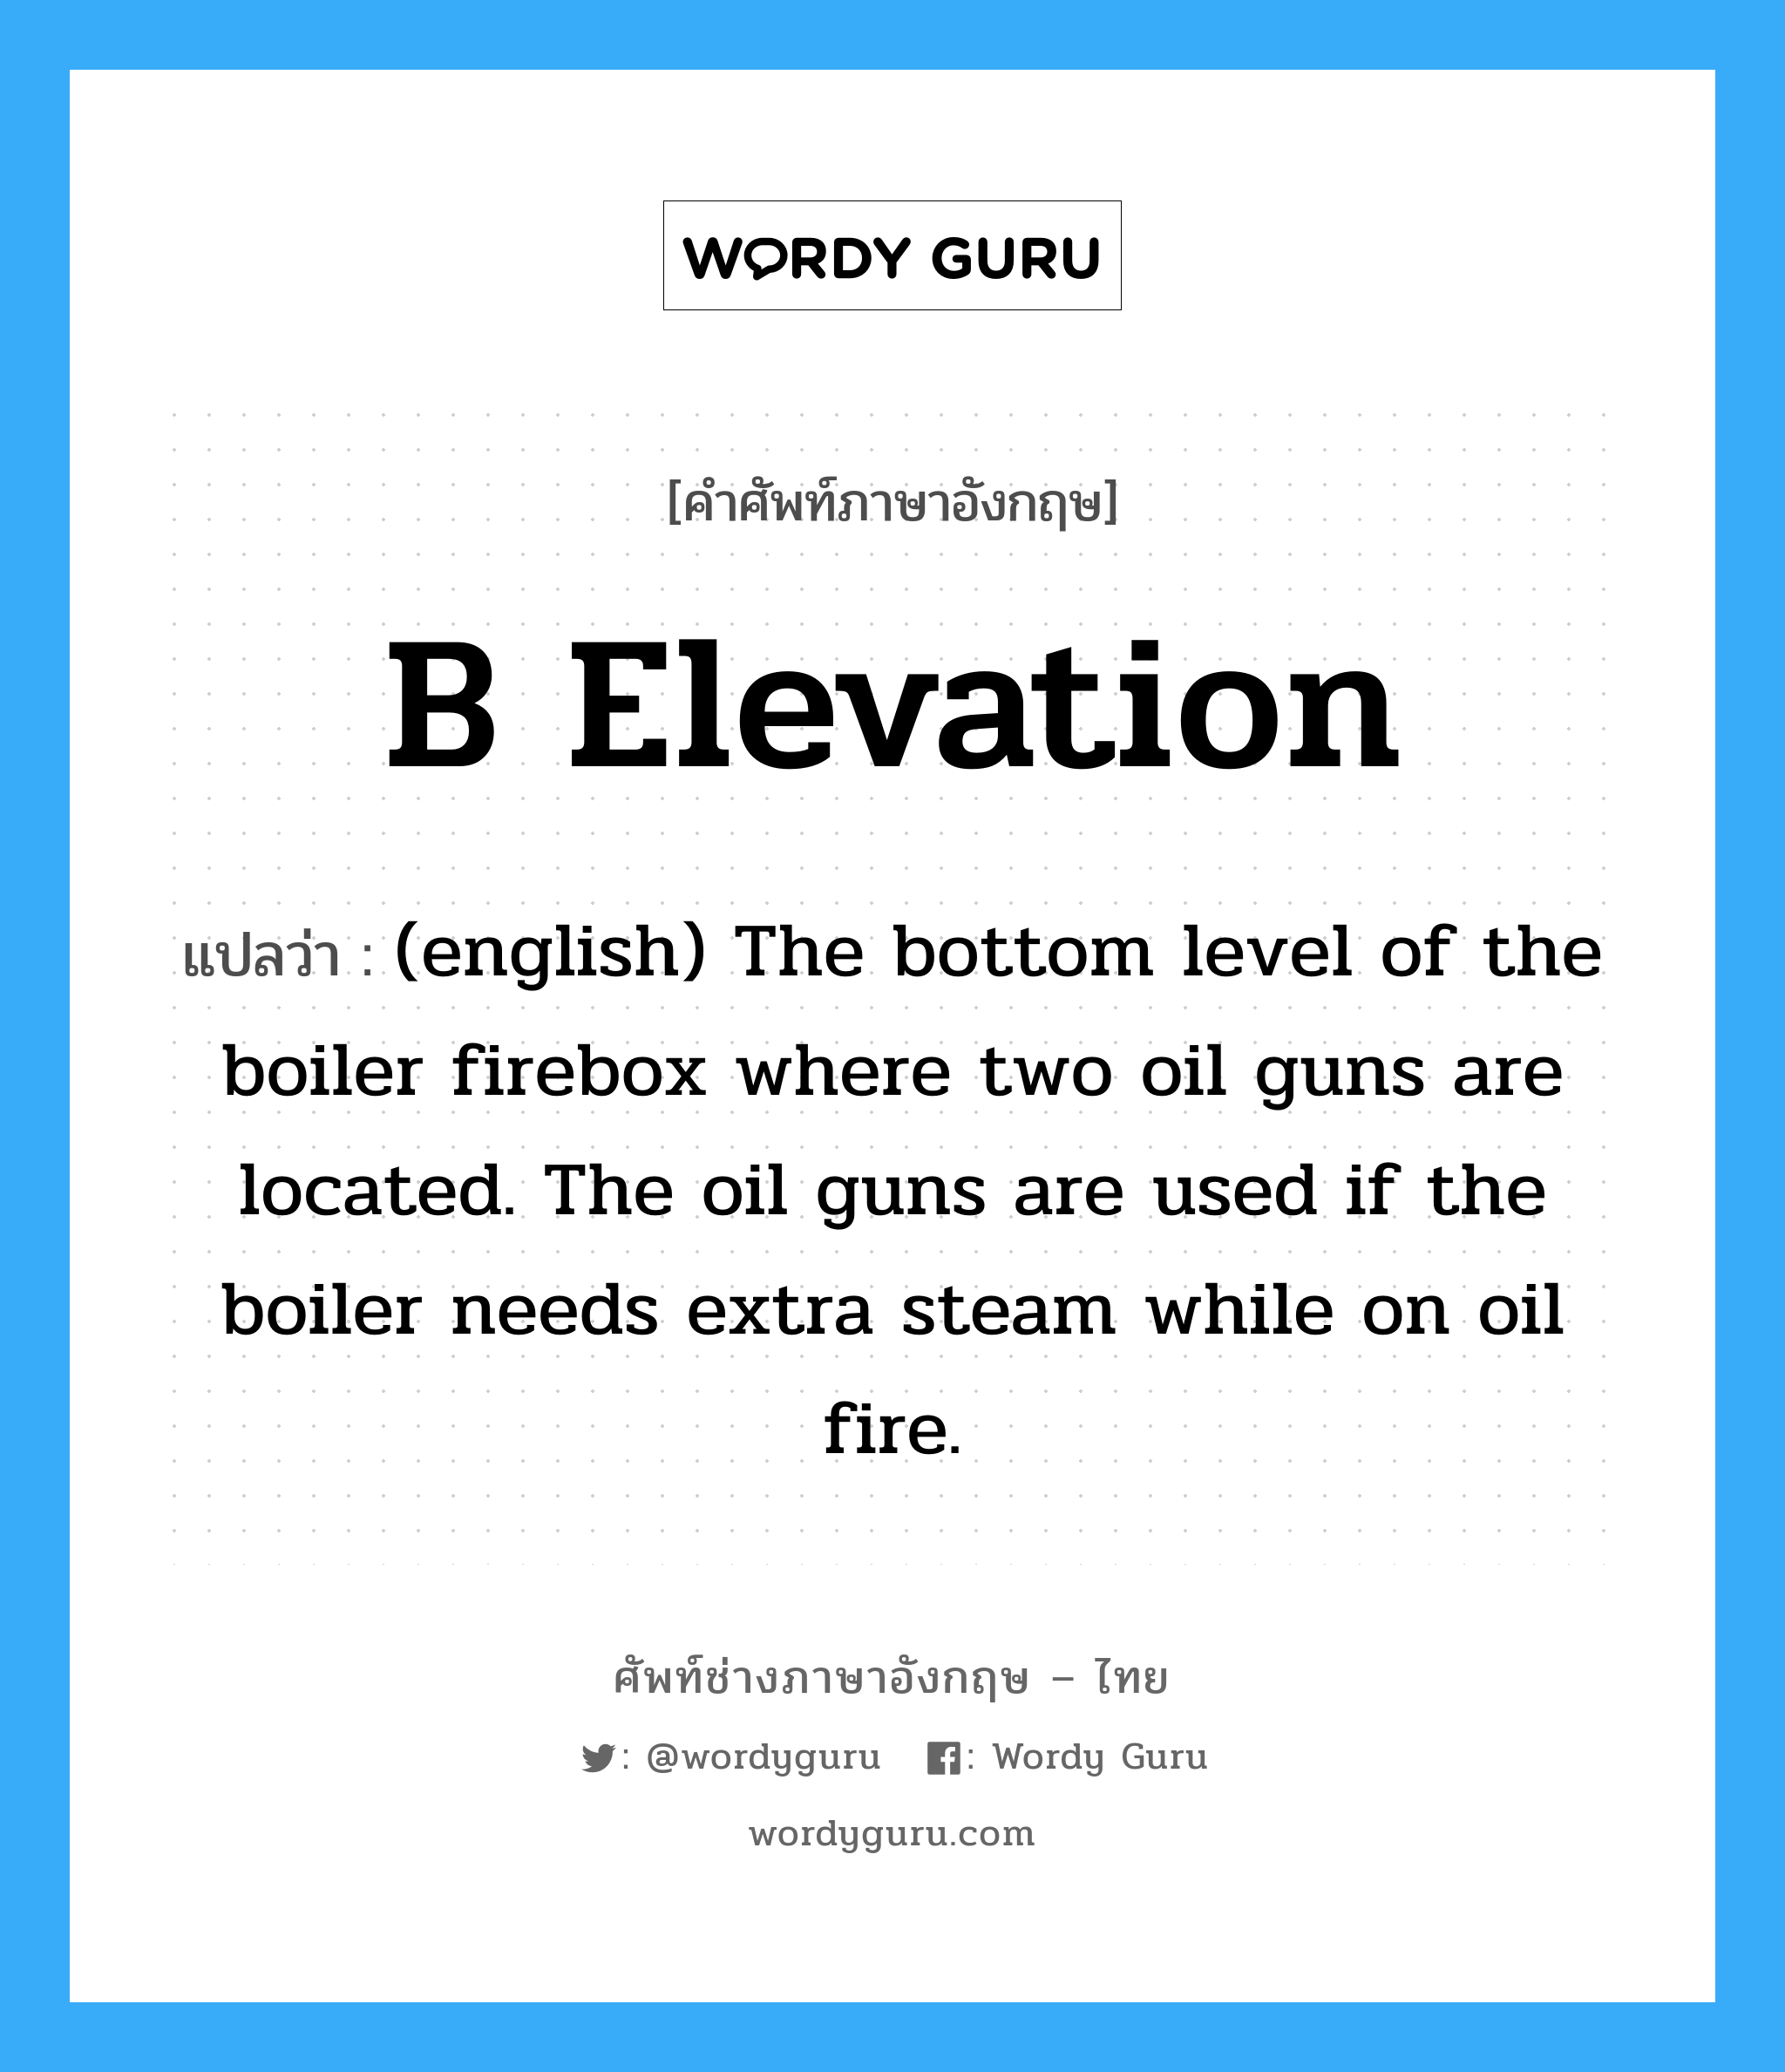 (english) The bottom level of the boiler firebox where two oil guns are located. The oil guns are used if the boiler needs extra steam while on oil fire. ภาษาอังกฤษ?, คำศัพท์ช่างภาษาอังกฤษ - ไทย (english) The bottom level of the boiler firebox where two oil guns are located. The oil guns are used if the boiler needs extra steam while on oil fire. คำศัพท์ภาษาอังกฤษ (english) The bottom level of the boiler firebox where two oil guns are located. The oil guns are used if the boiler needs extra steam while on oil fire. แปลว่า B Elevation